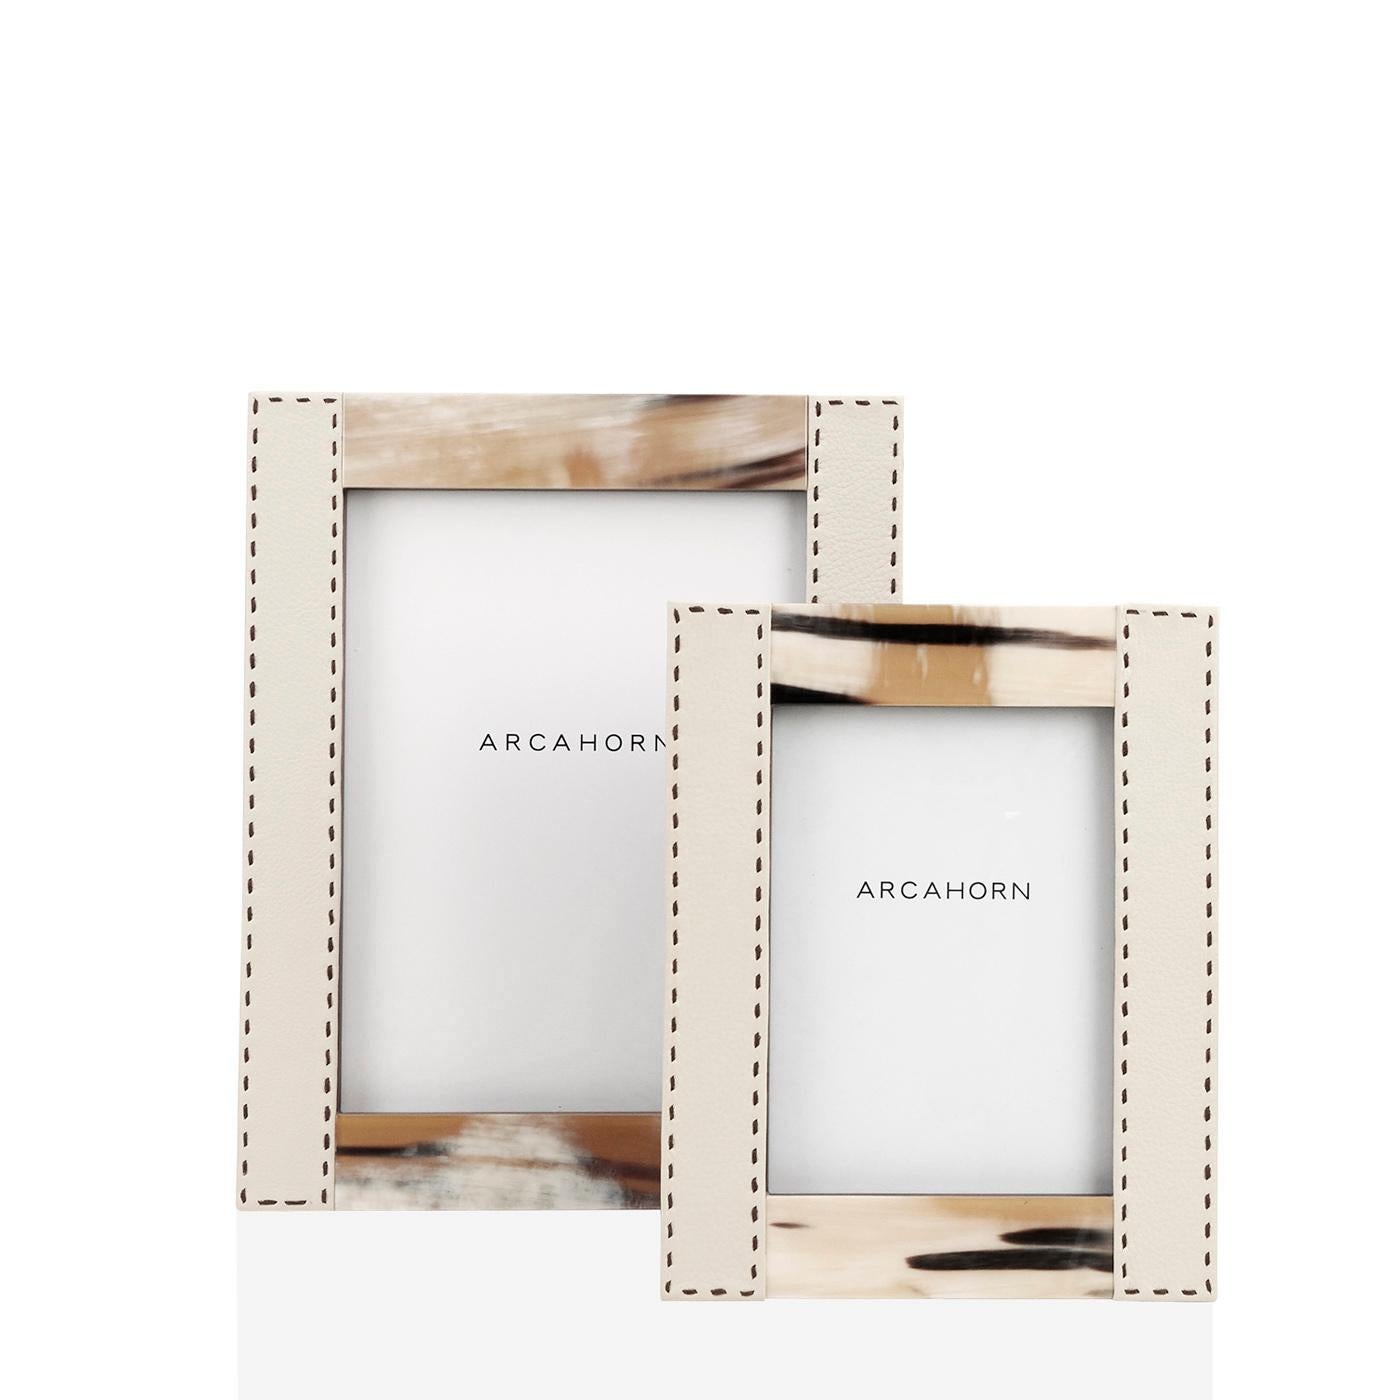 Whether it's for your own home decor or for a meaningful gift, our Dorotea picture frame is perfect for displaying the most beautiful photographic memories. Characterized by simple lines and fine materials, this frame is covered in Aida pebbled